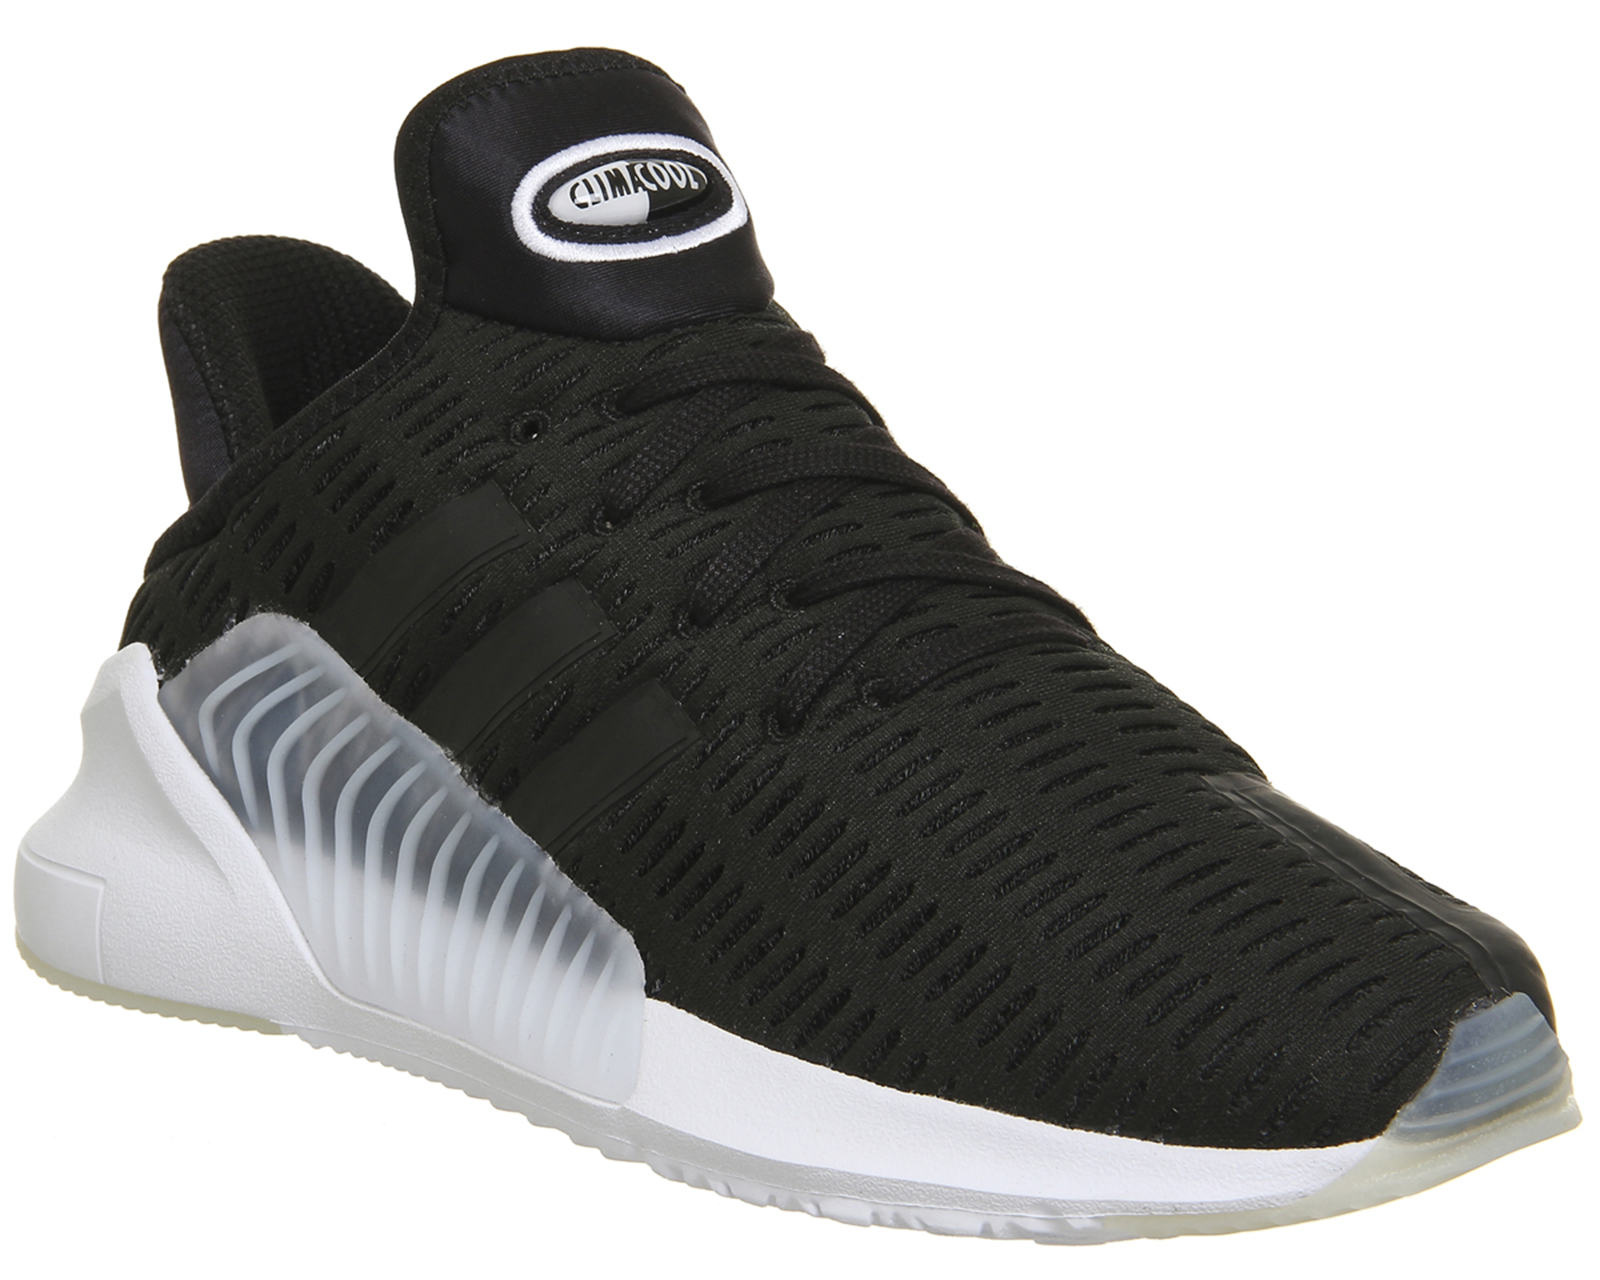 adidas climacool shoes black and white